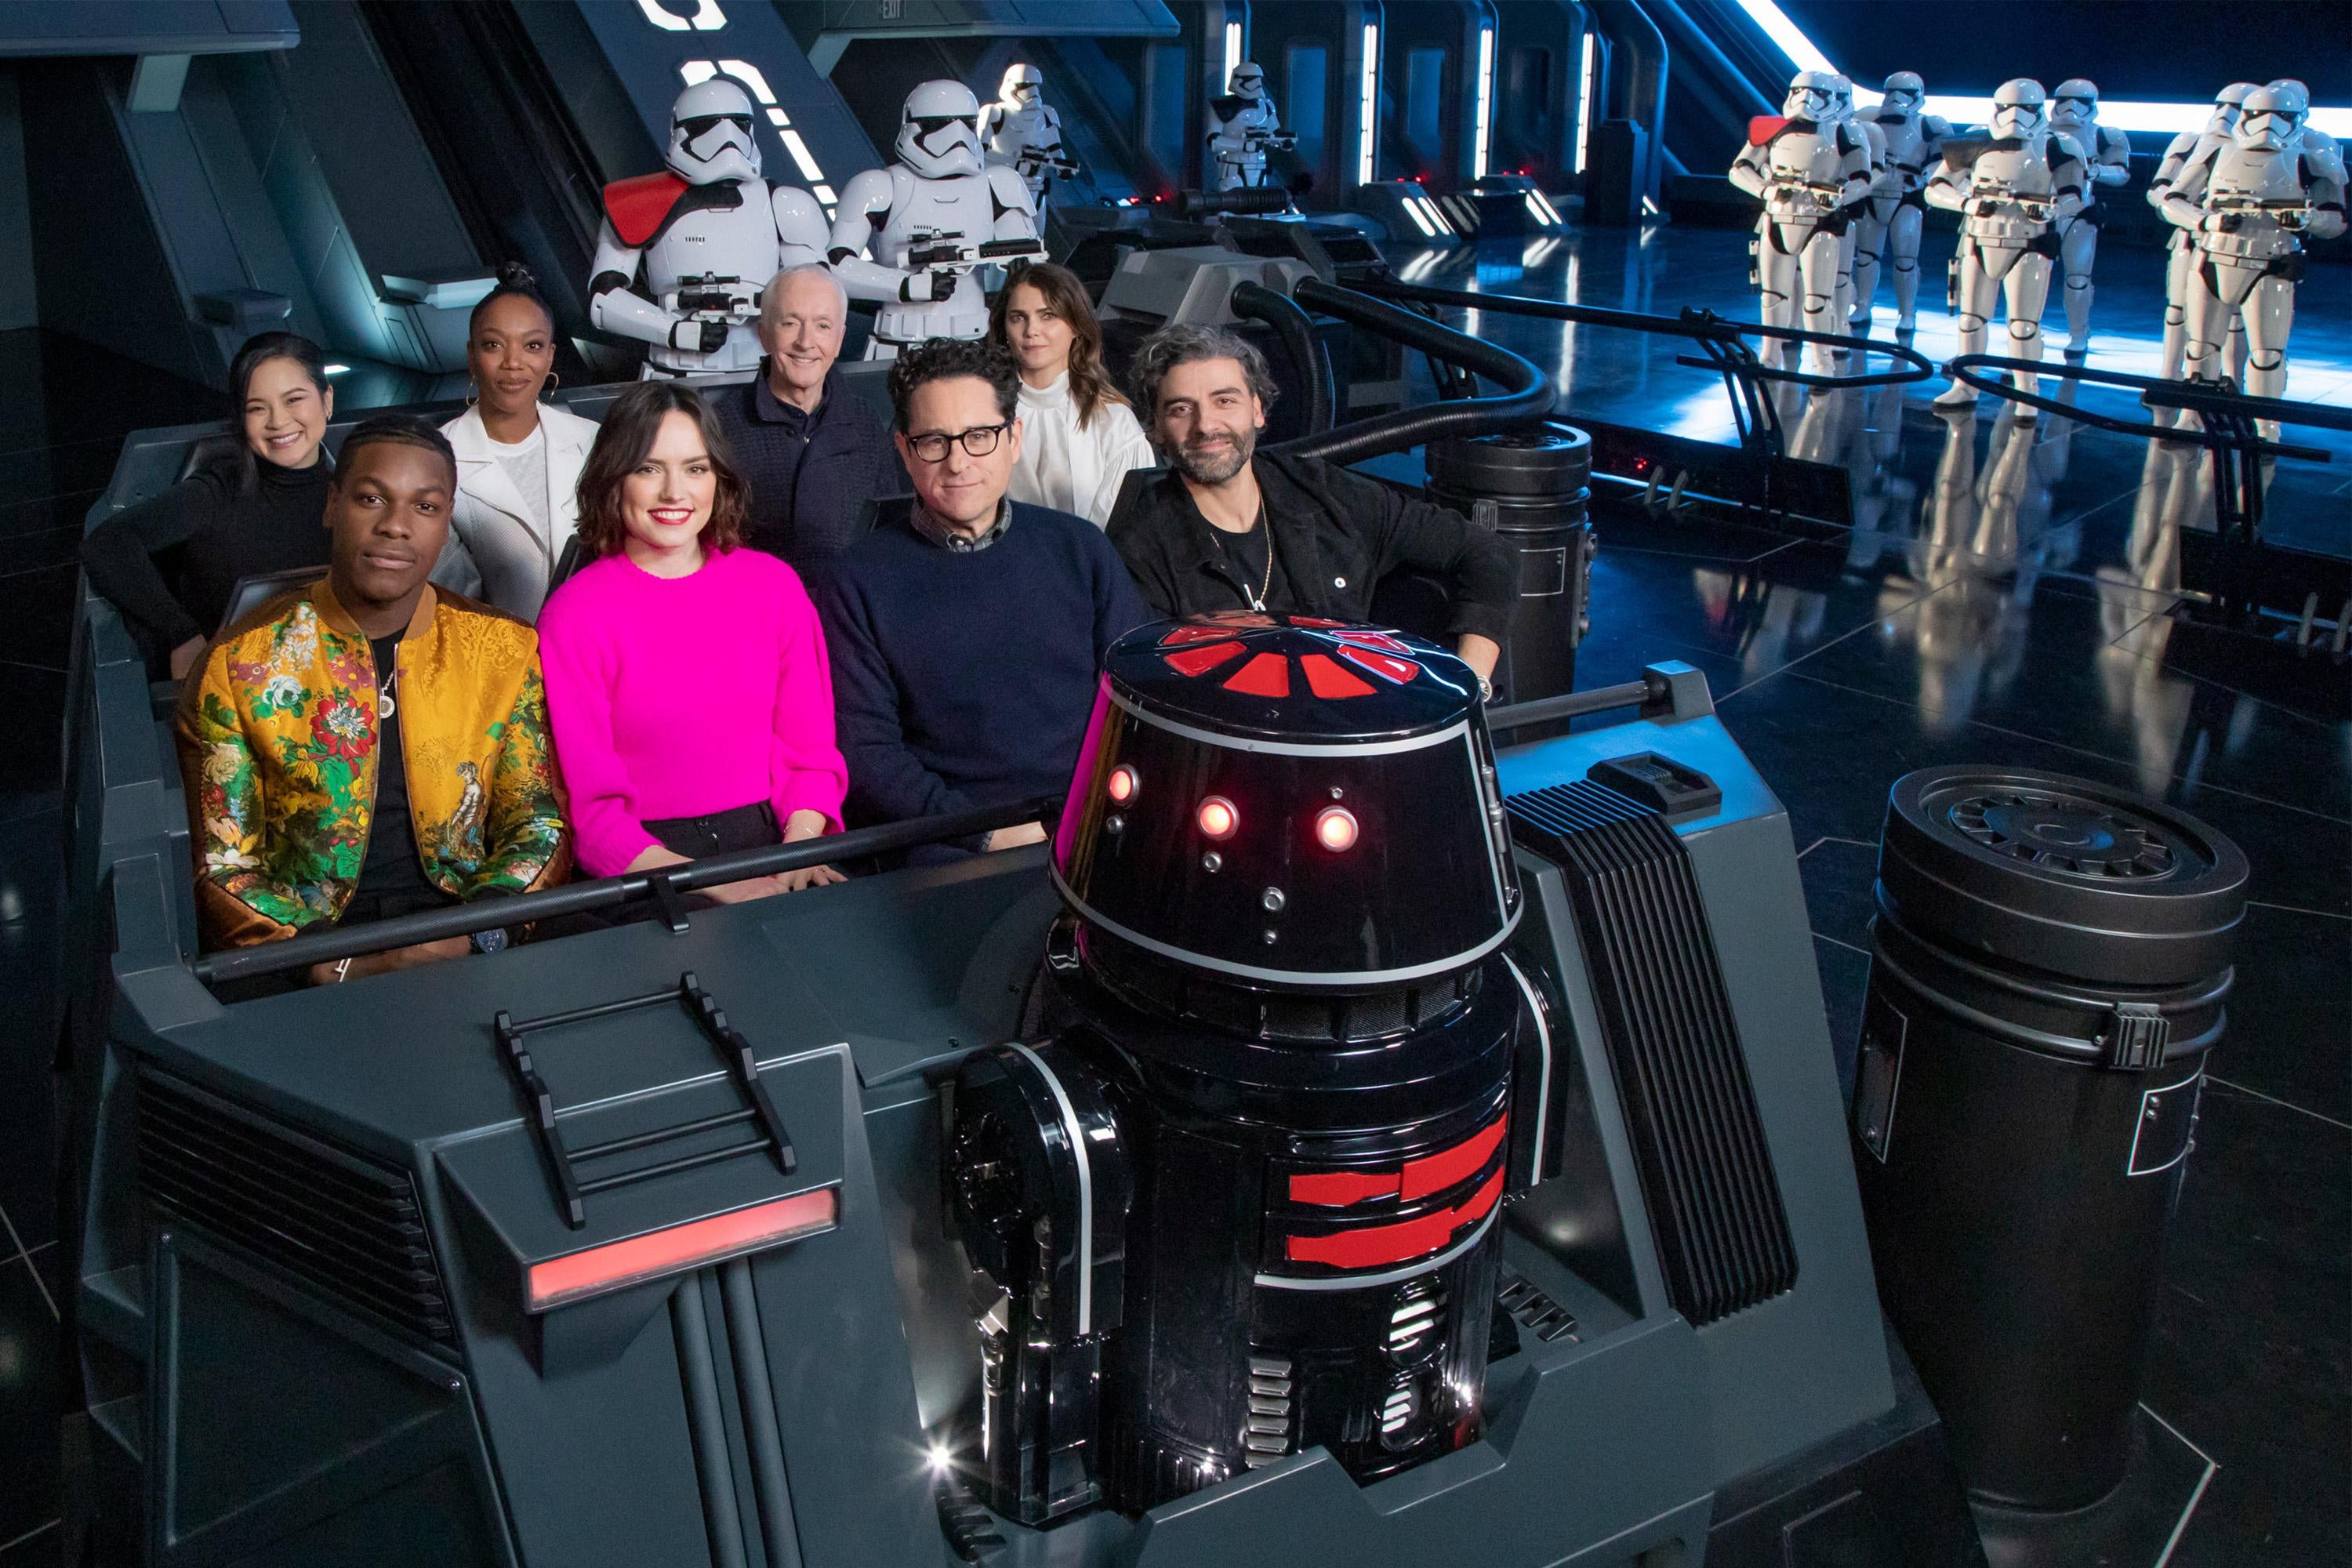 The cast of the upcoming film, Star Wars: The Rise of Skywalker, (L-R, front to back) John Boyega, Daisy Ridley, director J.J. Abrams, Oscar Isaac, Kelly Marie Tran, Naomi Ackie, Anthony Daniels and Keri Russell, gets a first-look at the new Star Wars: Rise of the Resistance attraction in Star Wars: Galaxys Edge at Disneyland Park December 2, 2019 in Anaheim, California.